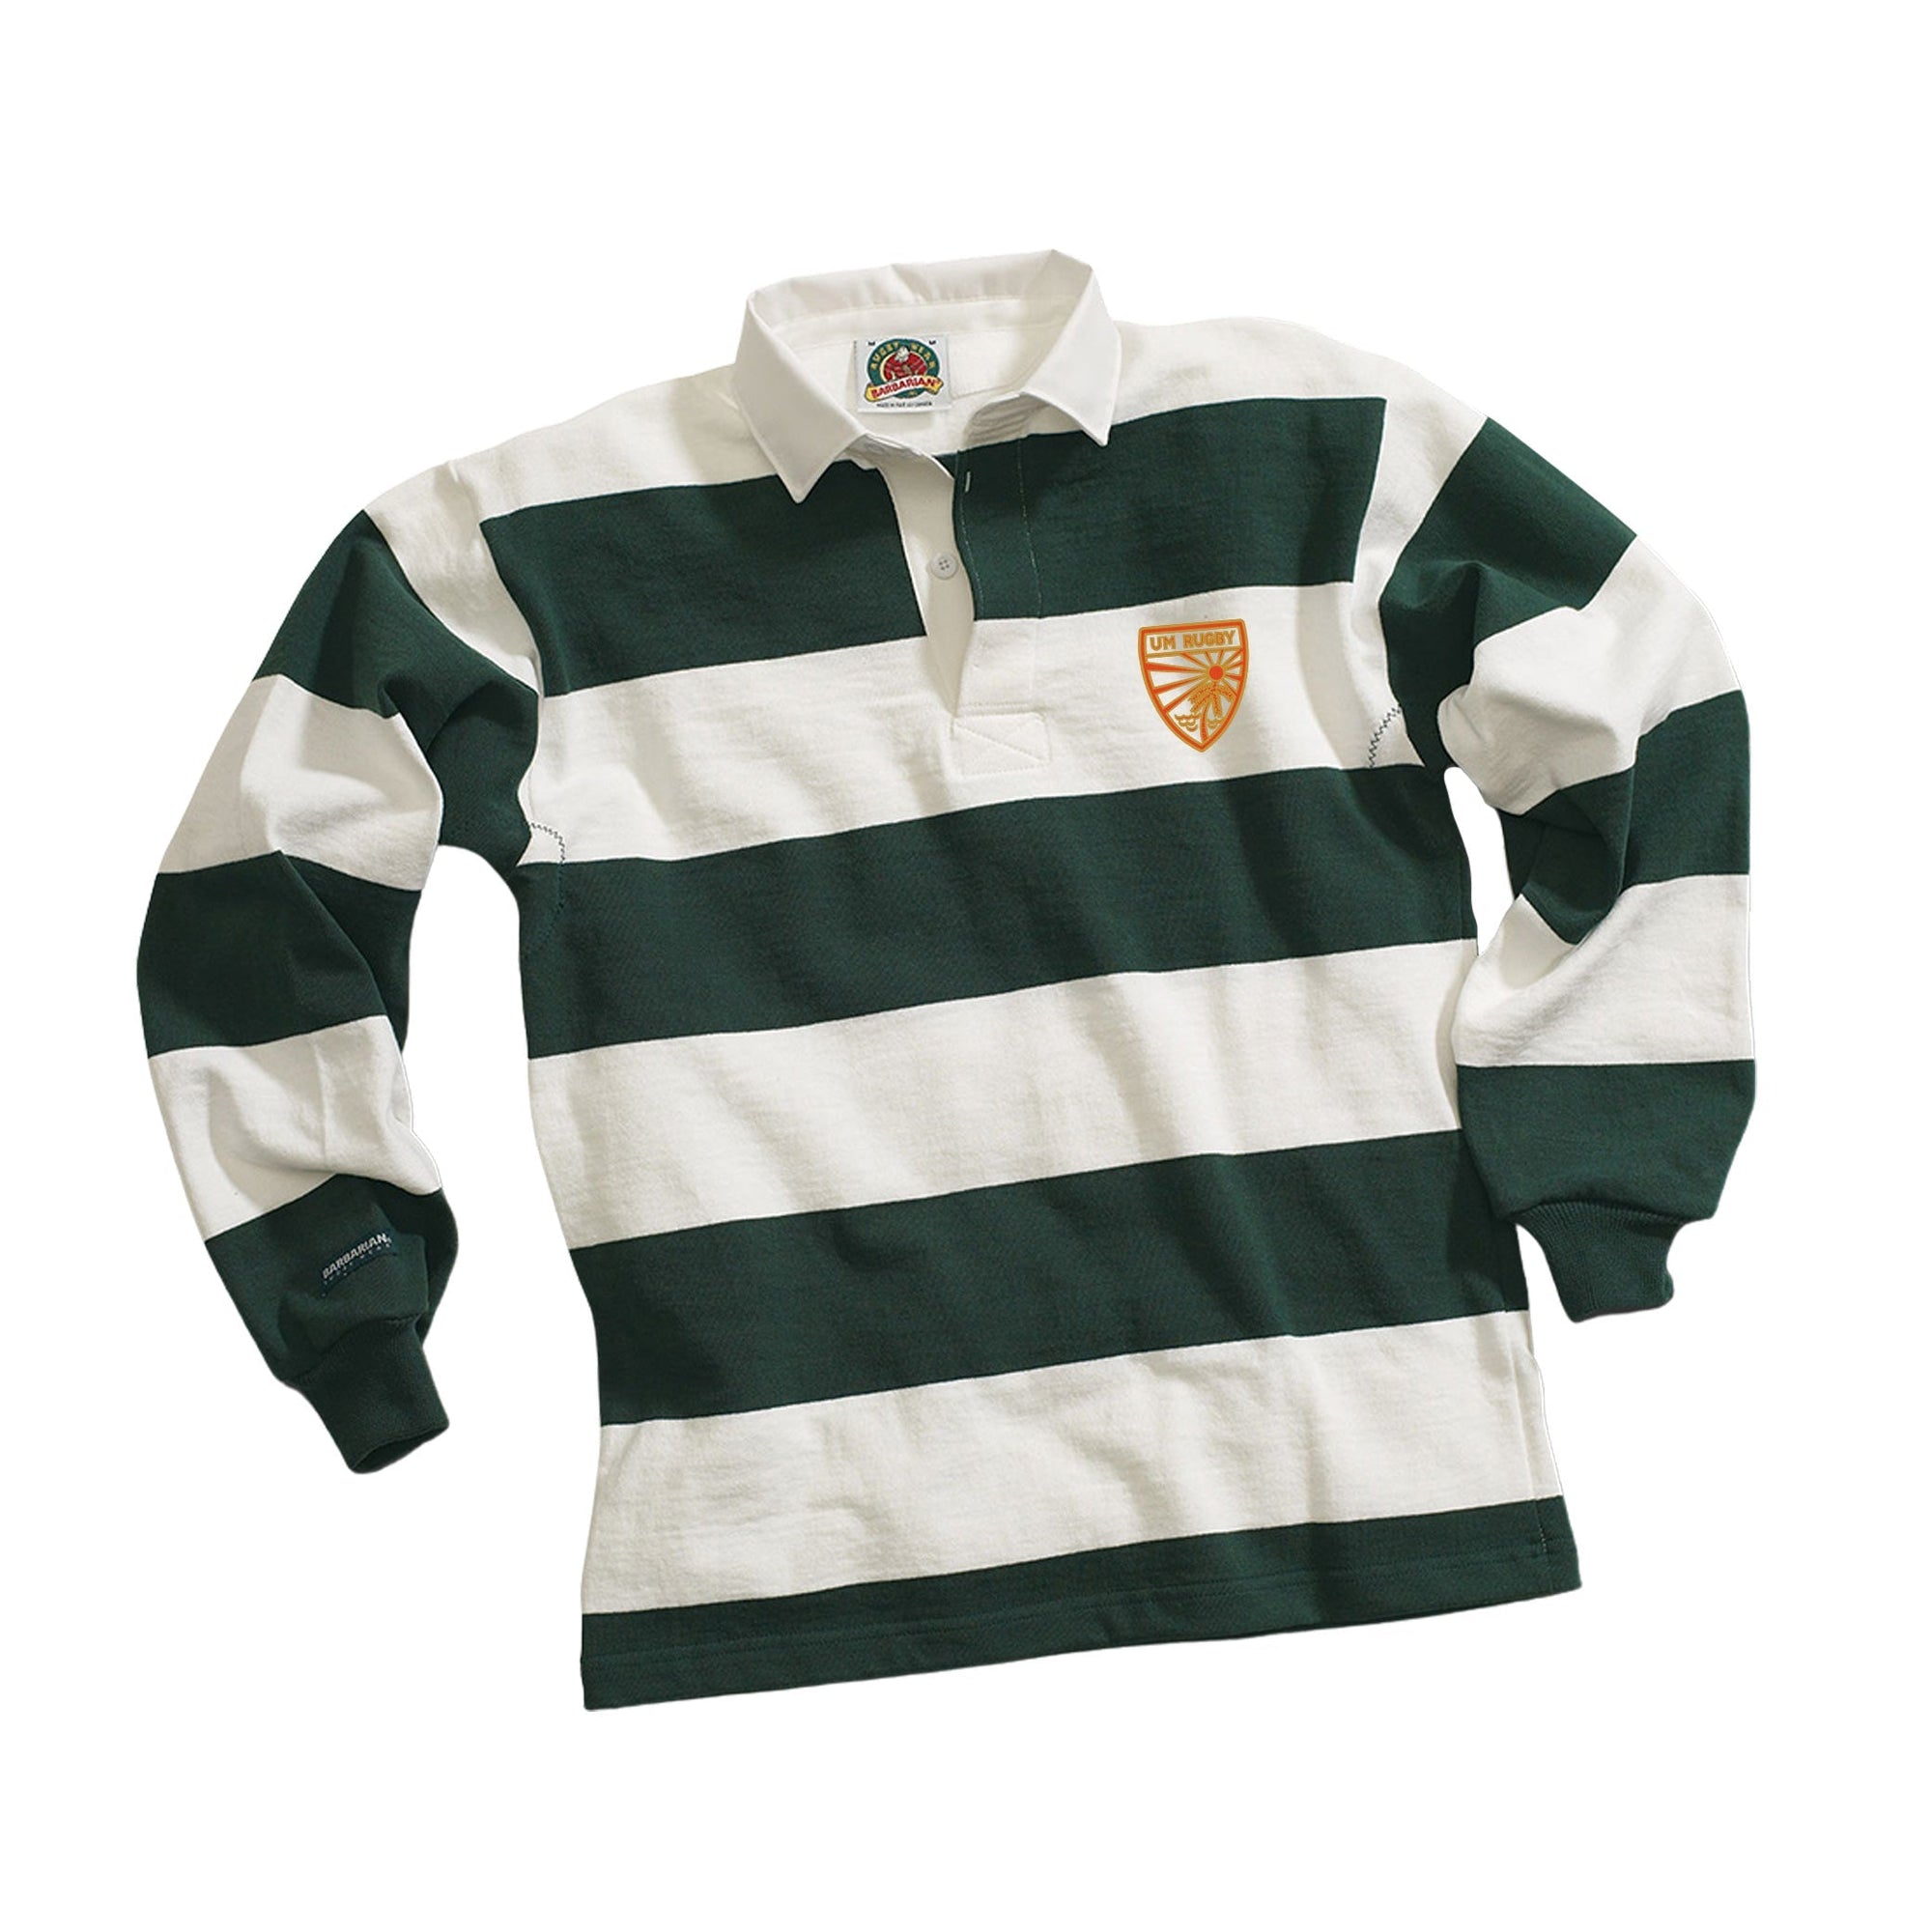 Rugby Imports UMiami Rugby 4 Inch Stripe Jersey